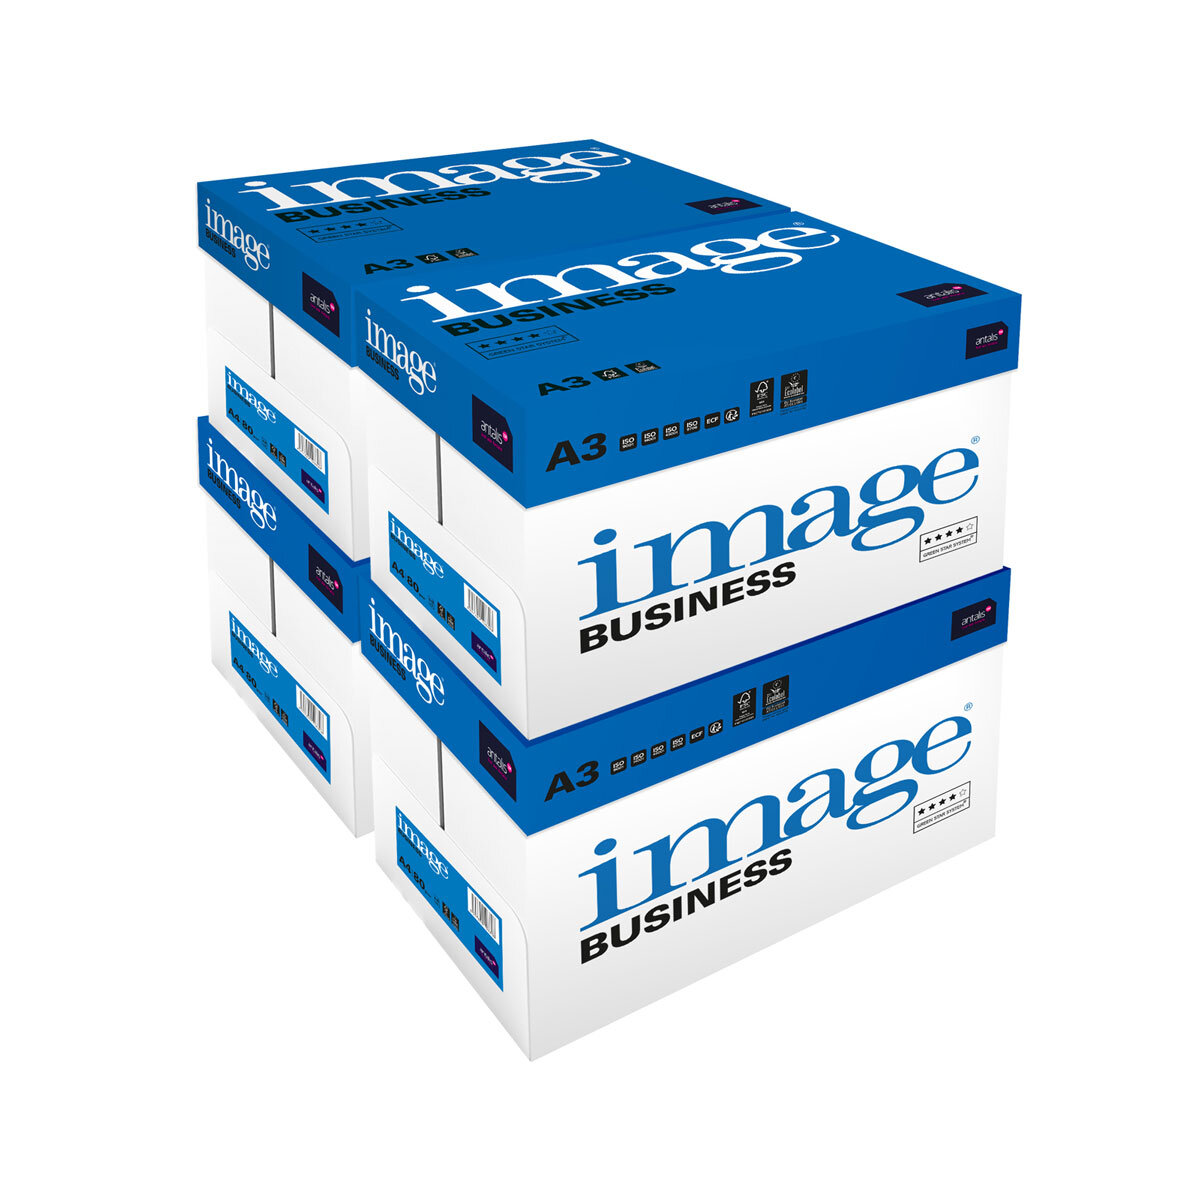 Buy Image Business A3 80gsm (4 BOXES OF 2500 SHEETS) Overview Image at Costco.co.uk